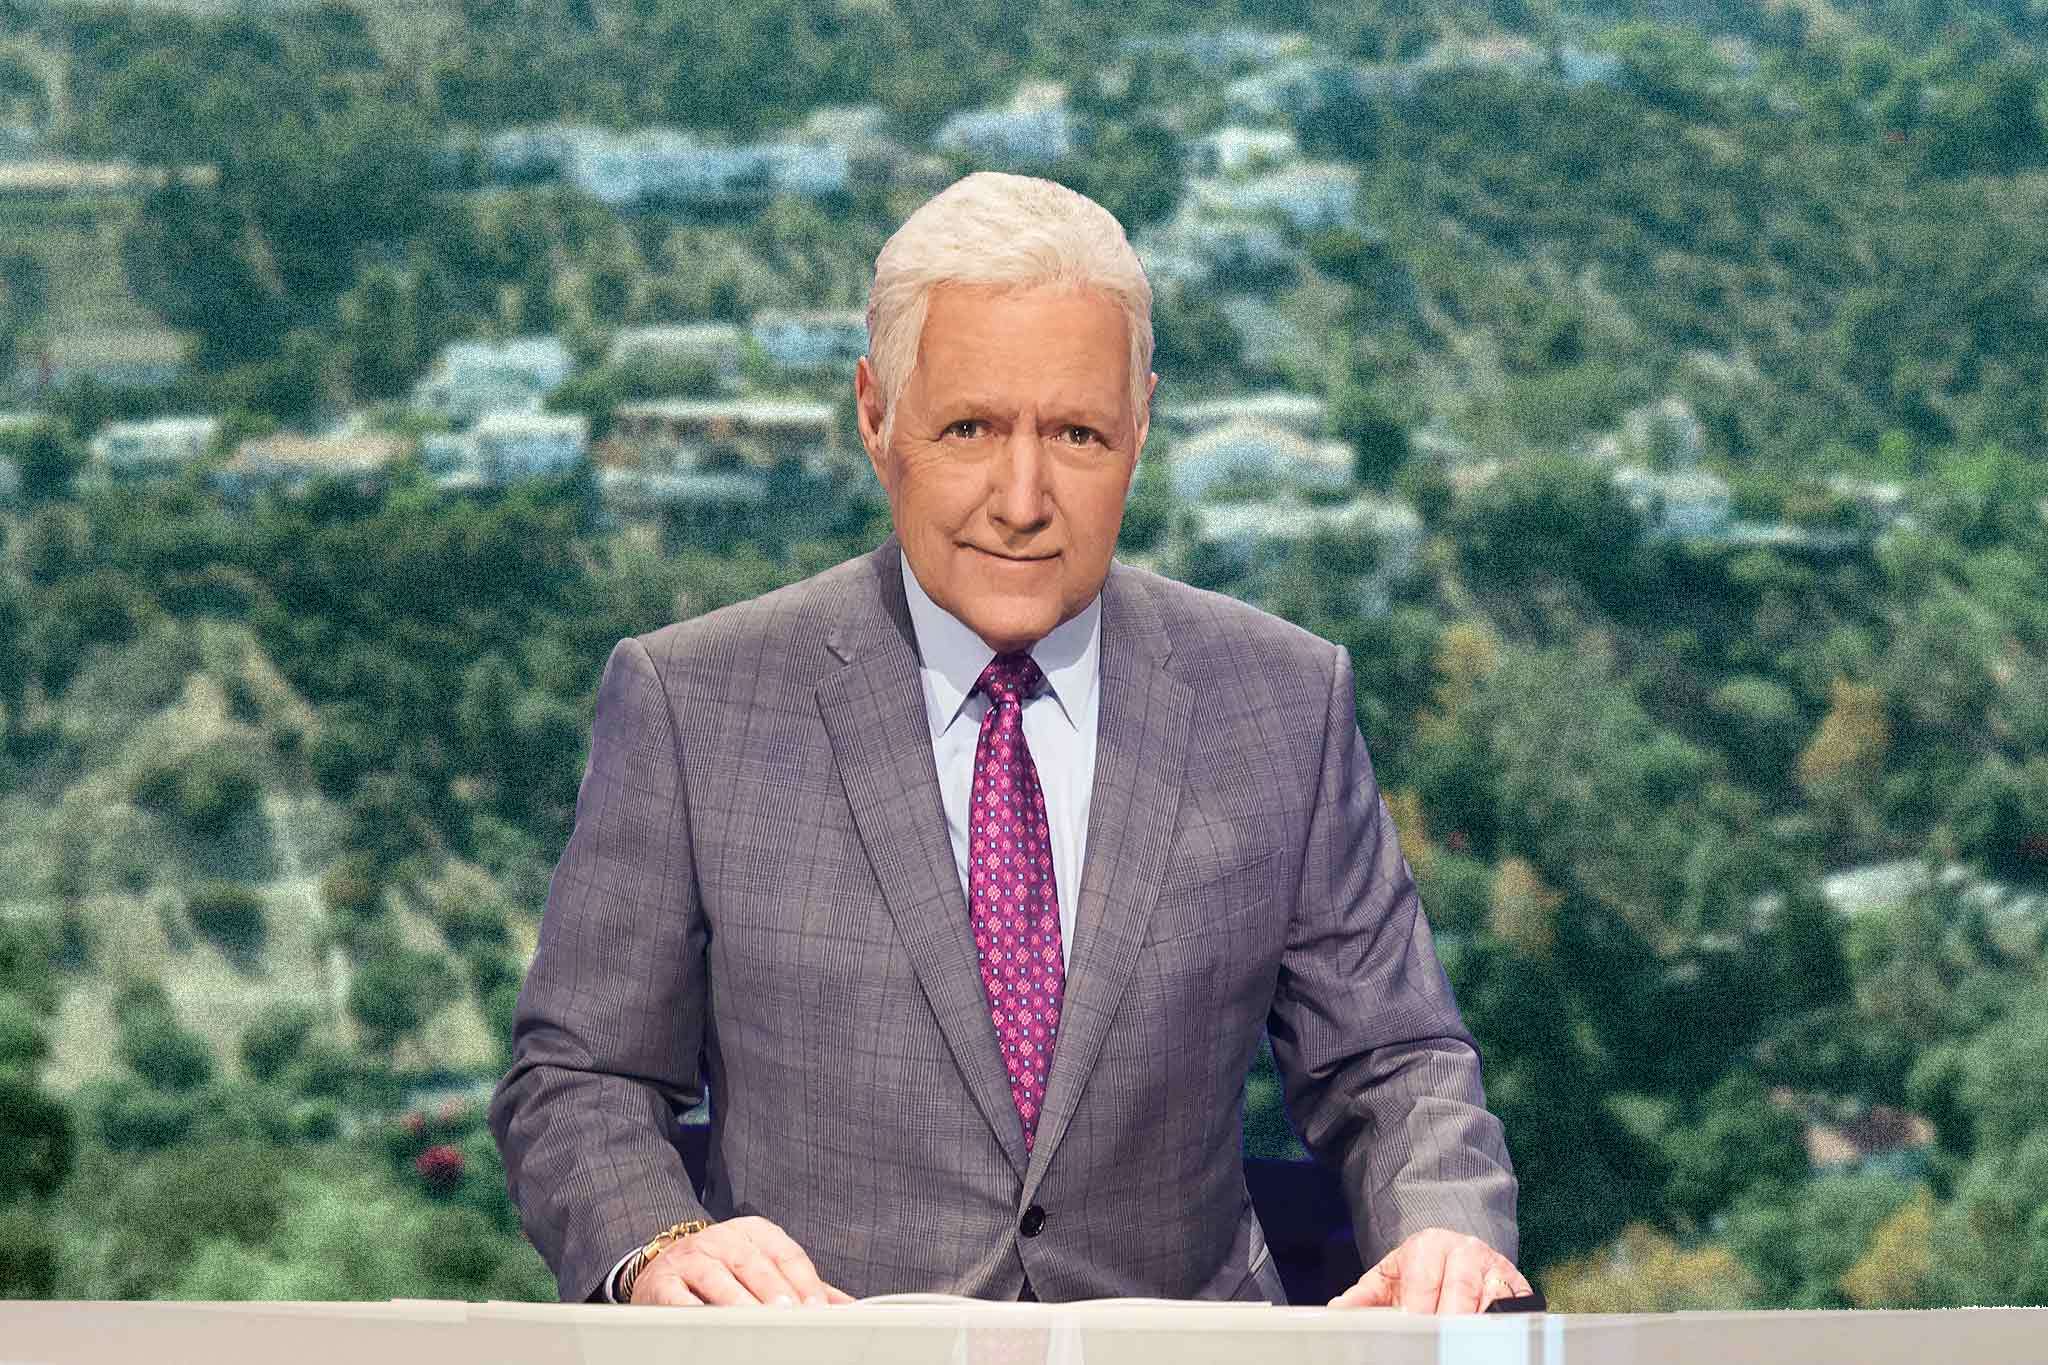 When Alex Trebek died last November, he left a hole in pop culture that cannot be filled, as much as the prospective new “Jeopardy!” hosts